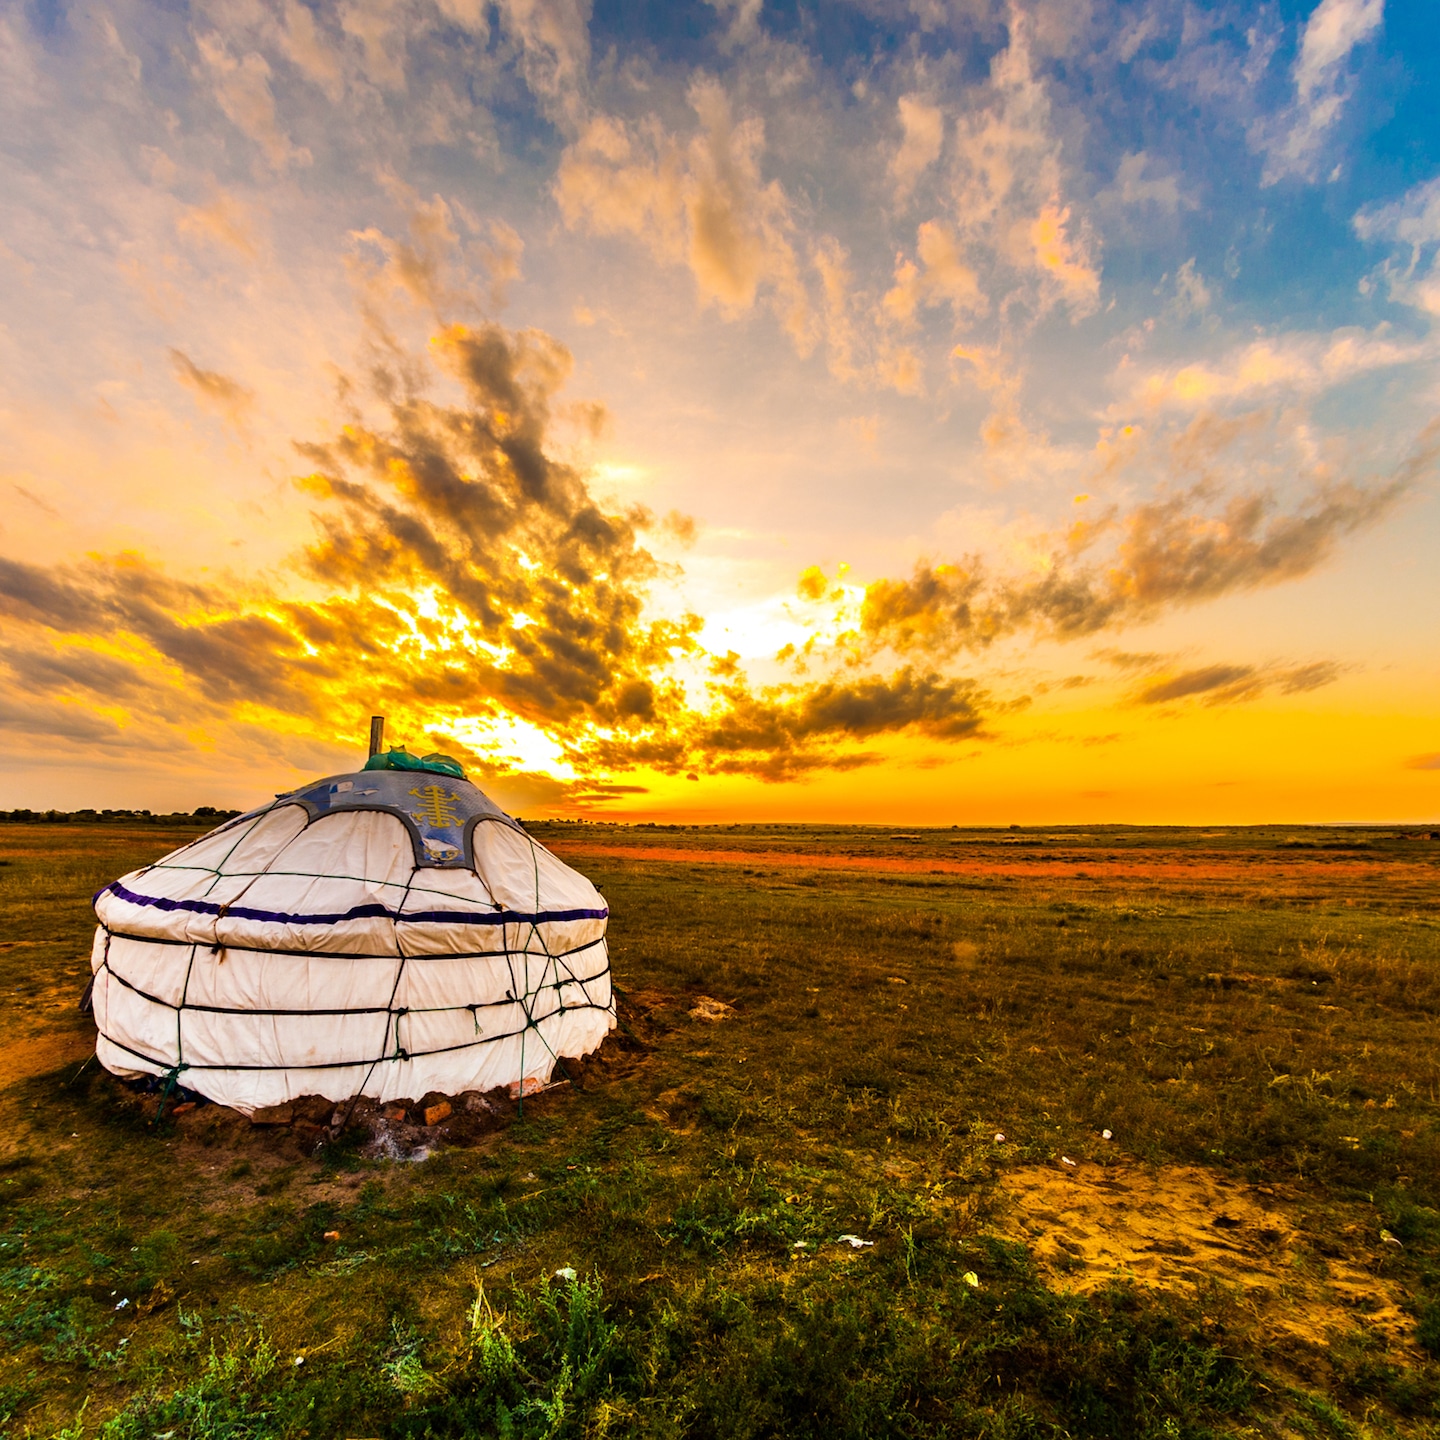 mongolia best time to visit